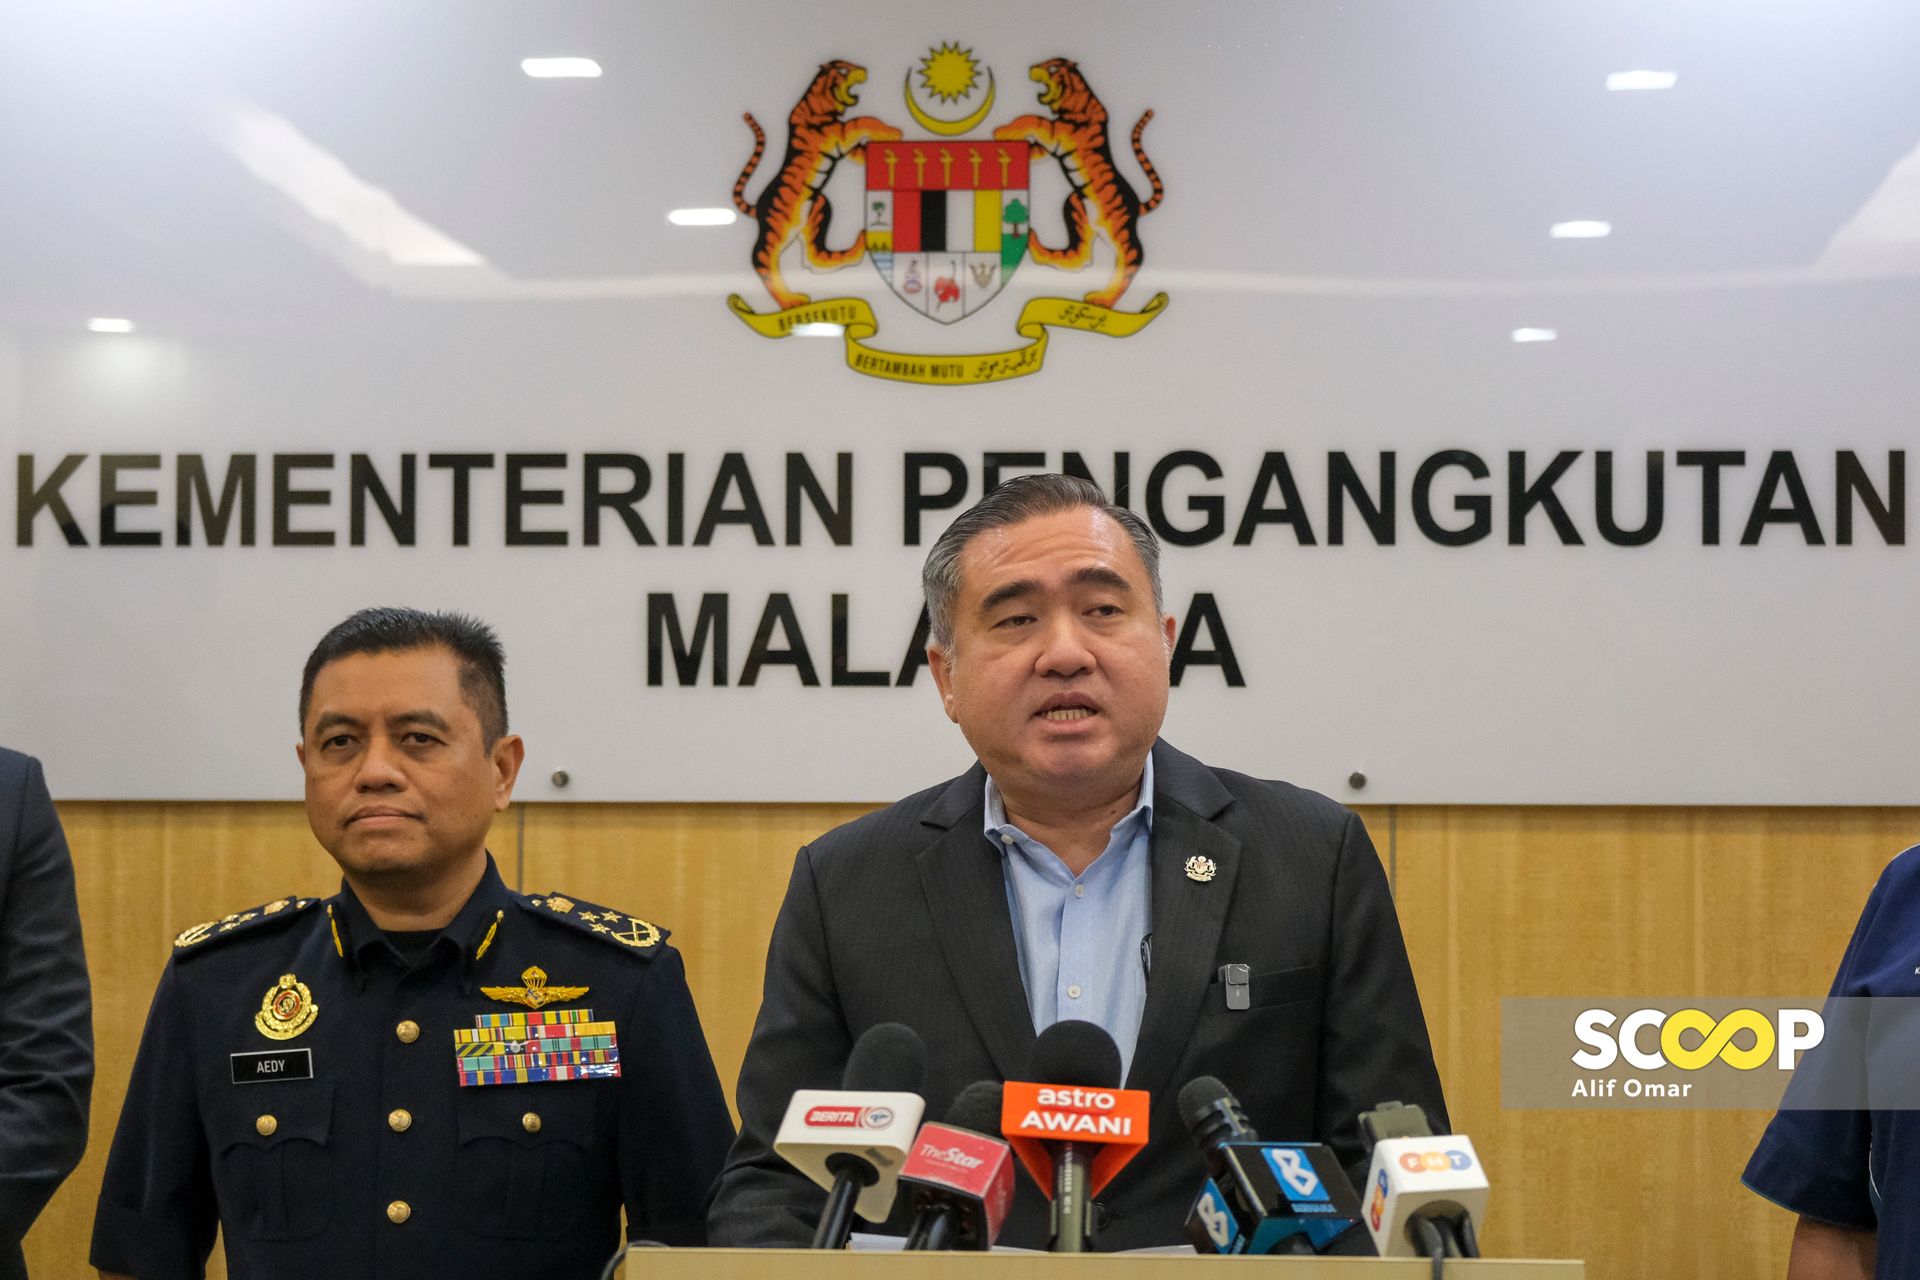 Loke reinstates cabotage exemption for foreign cable-laying ships